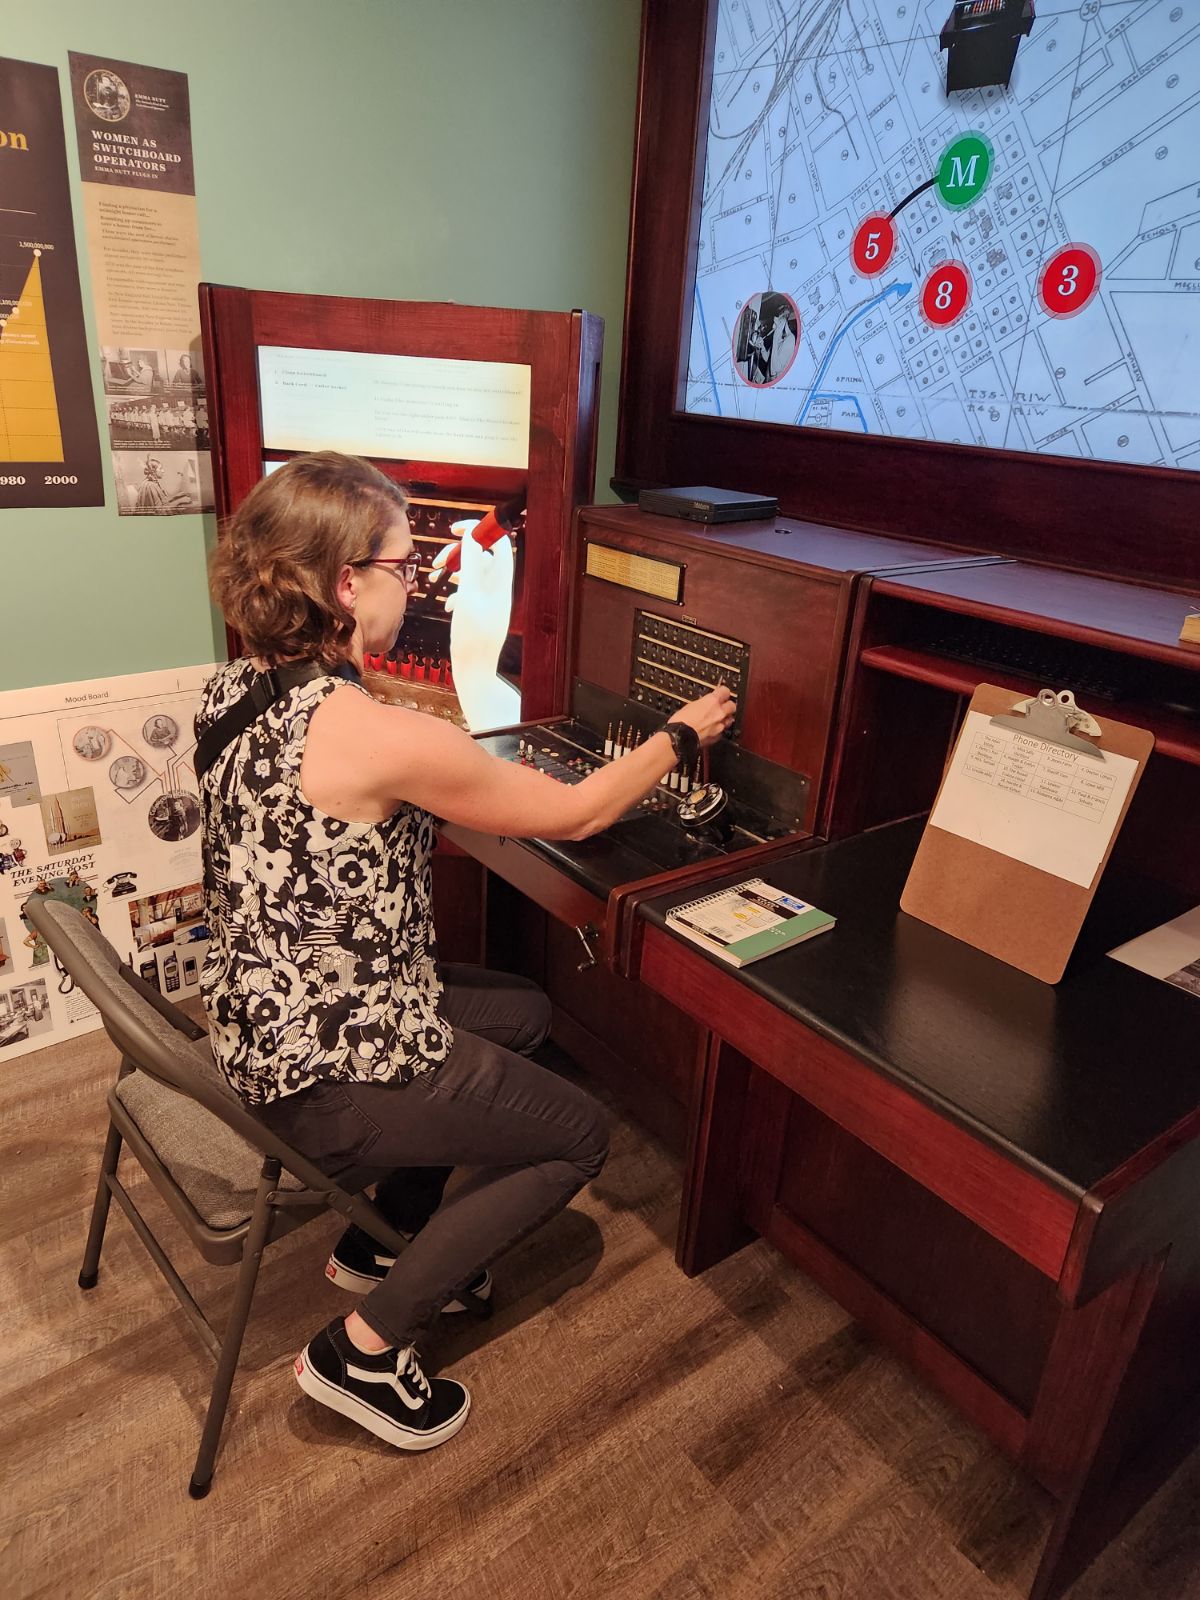 Rebecca Key (KO4KVG) participating in an interactive game at SIGNALS: Museum of Information Explosion that involves operating a switchboard circa 1928